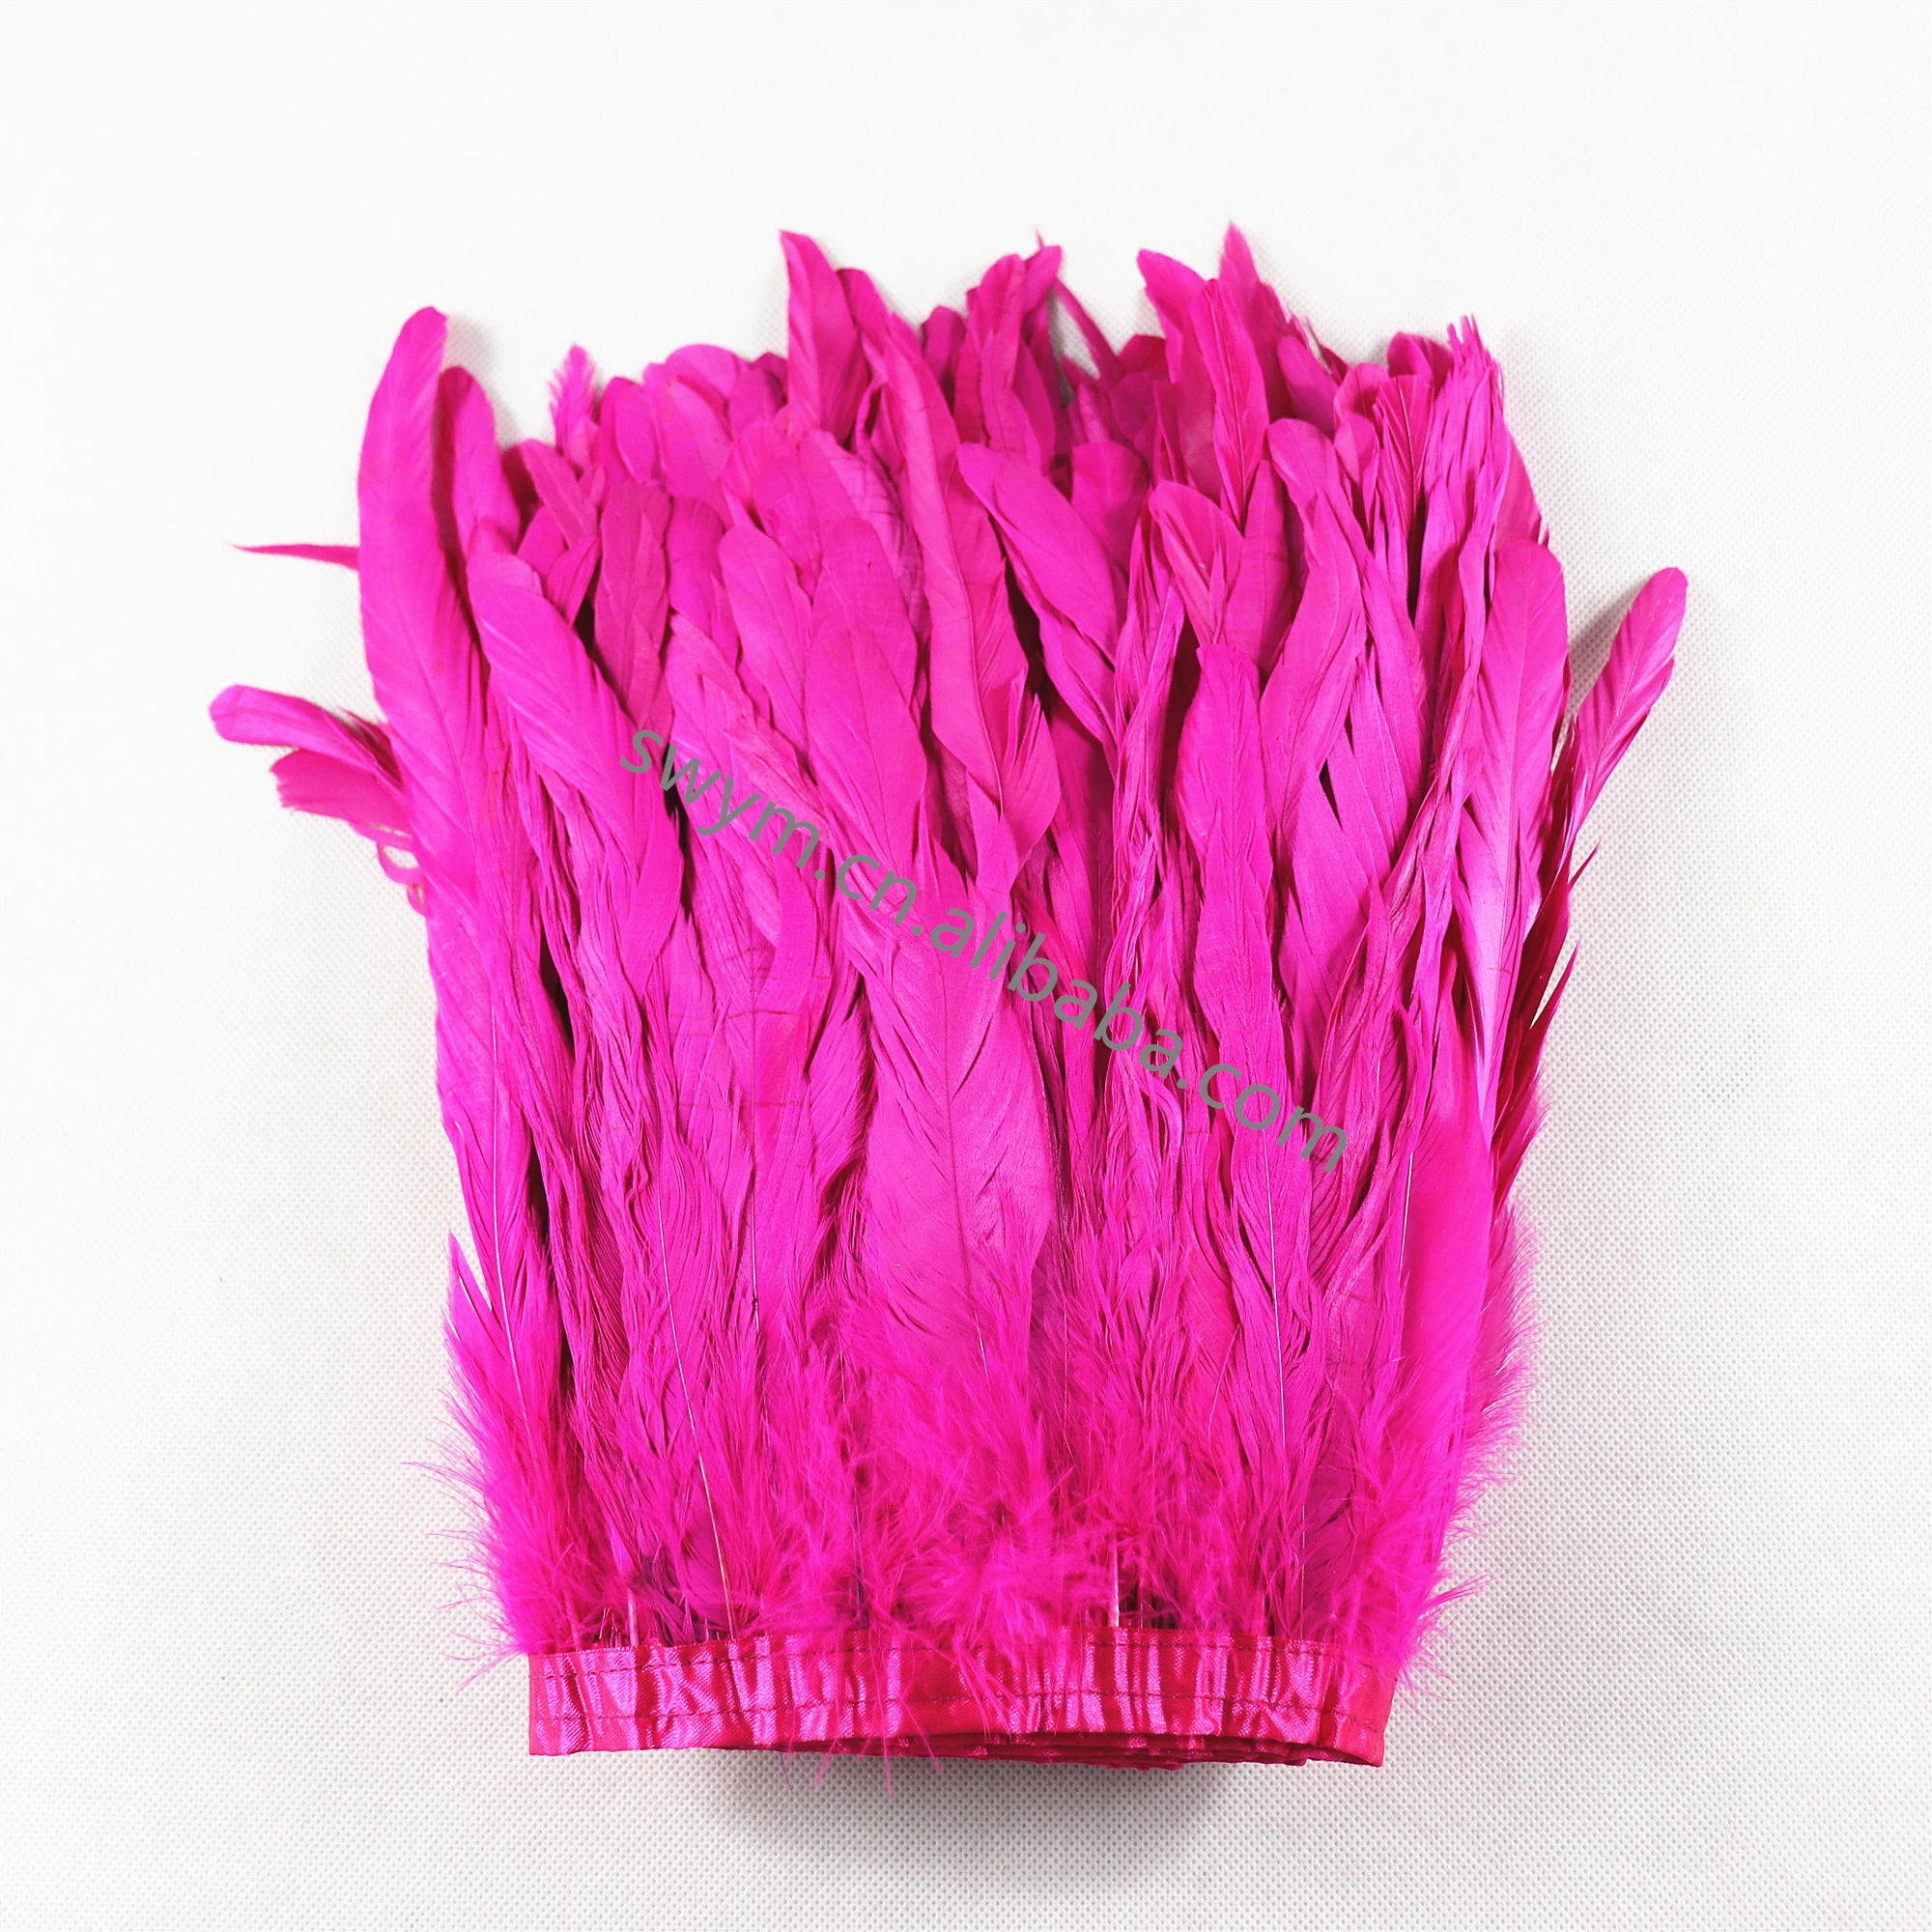 10-12in/25-30cm Dyed Rooster Feather Trim Fuchsia Cock Tail Feather Fringe